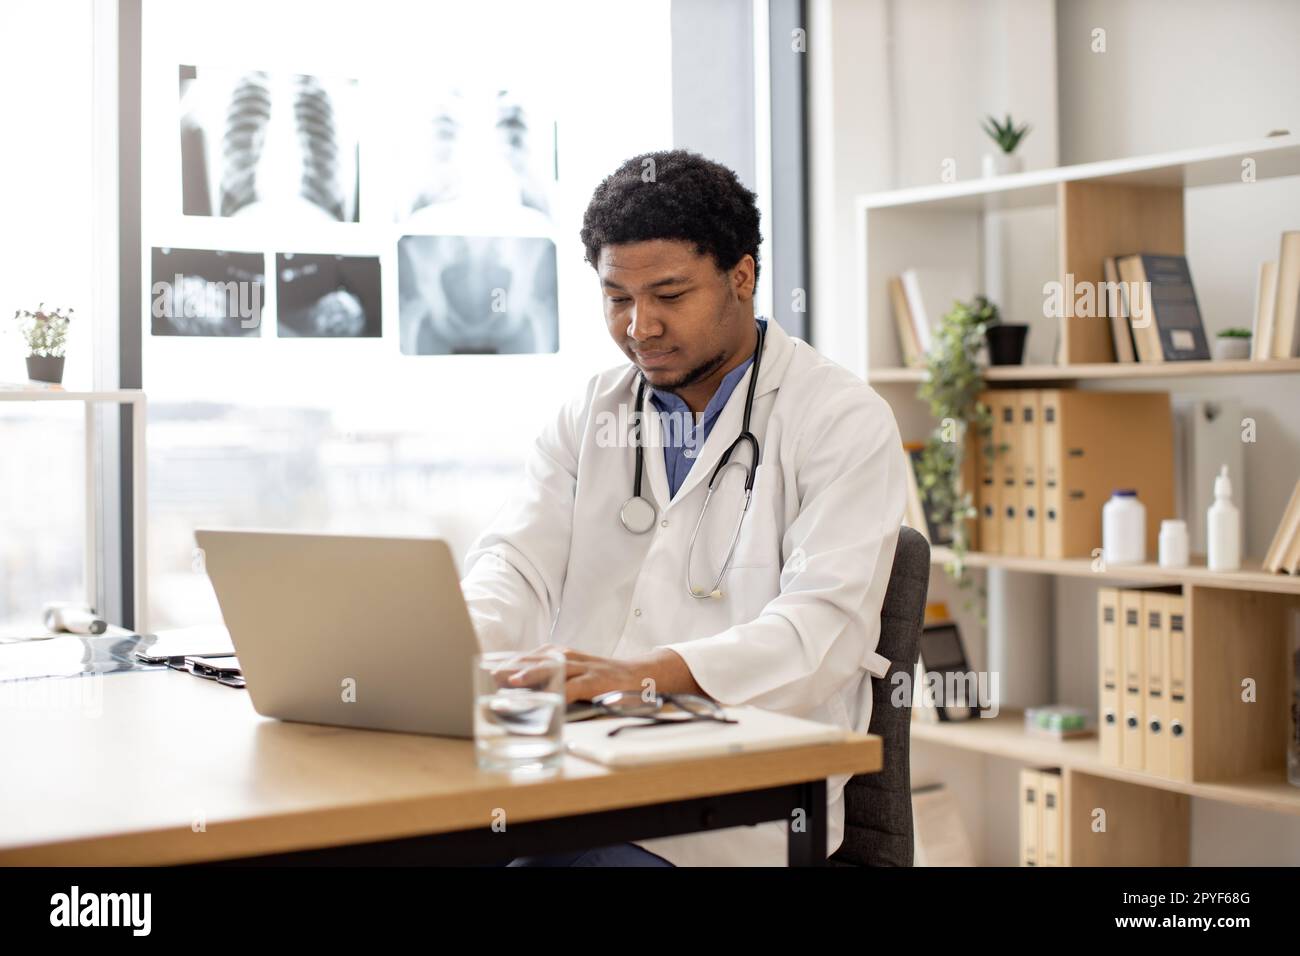 Mindful multicultural adult in white coat with stethoscope using portable computer in doctor's workplace. Health professional developing treatment pla Stock Photo